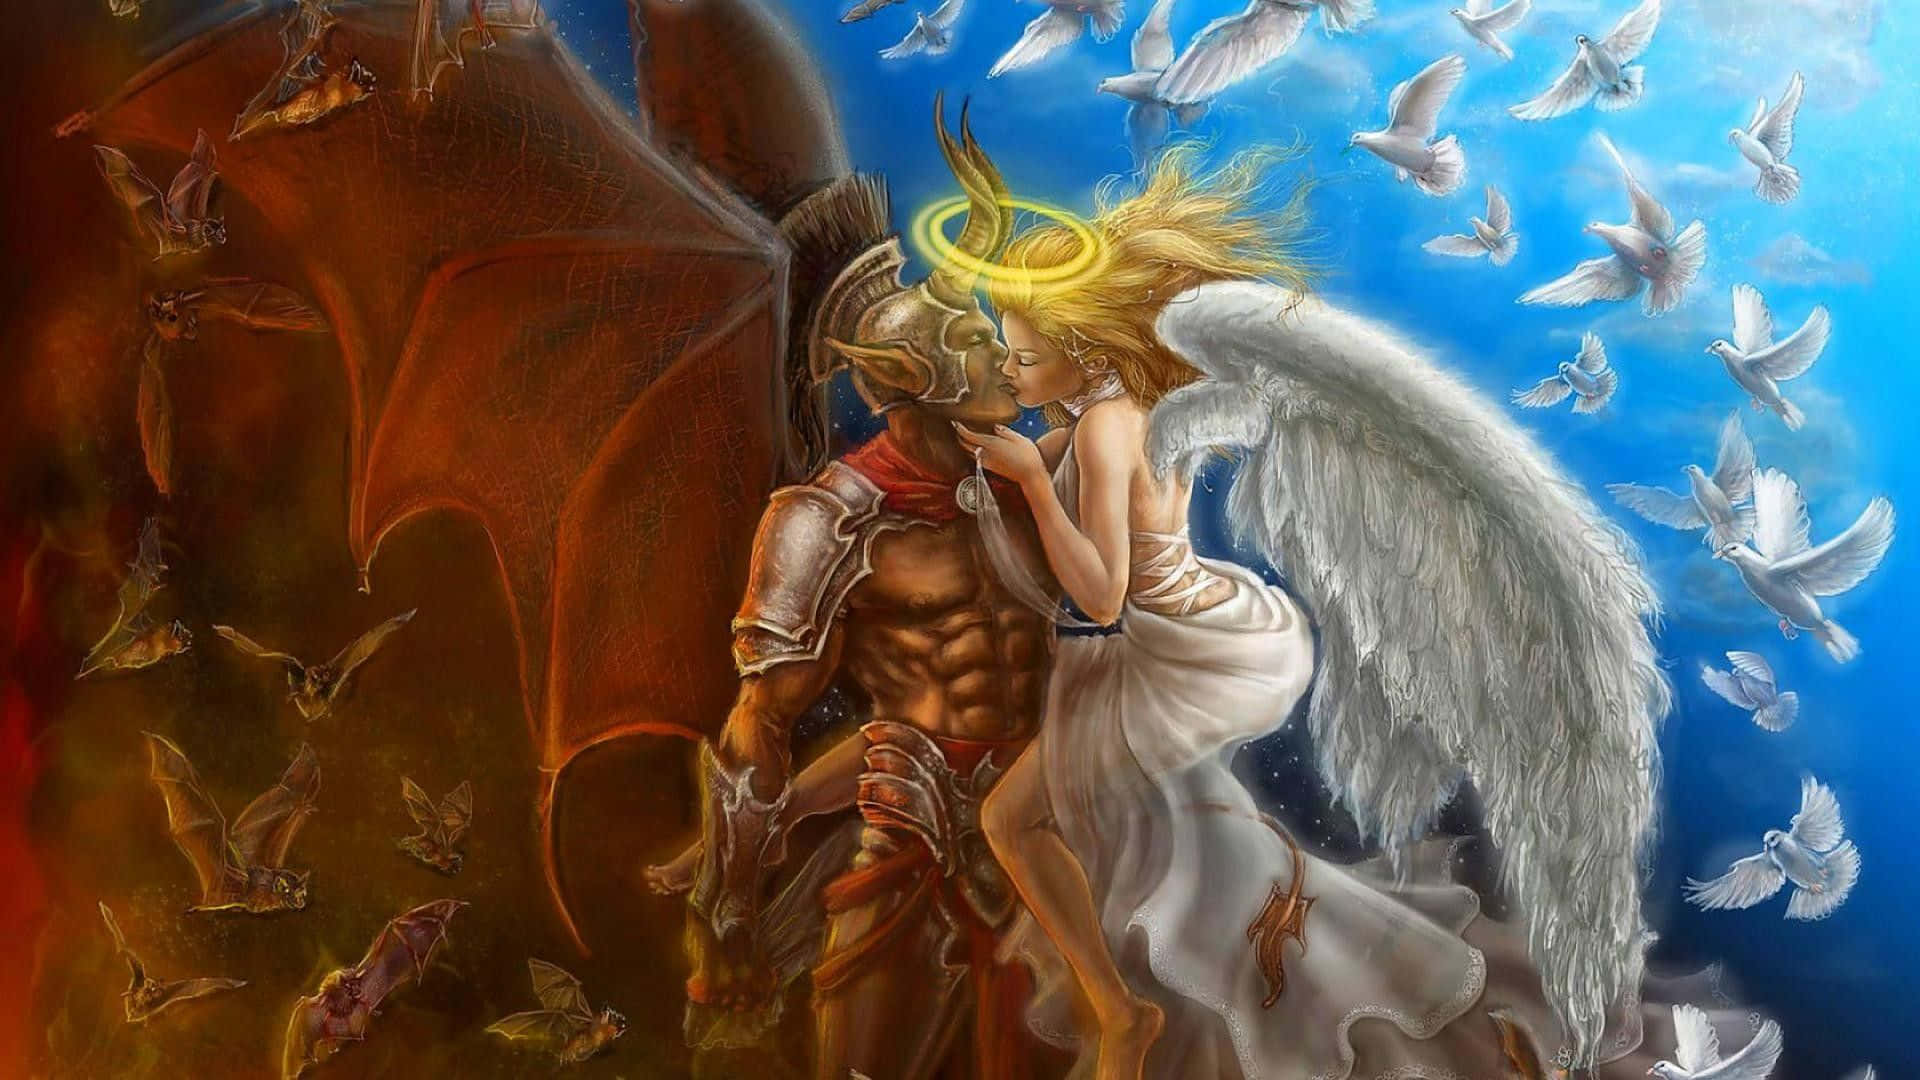 Angels And Demons - A Painting Of Two Angels Kissing